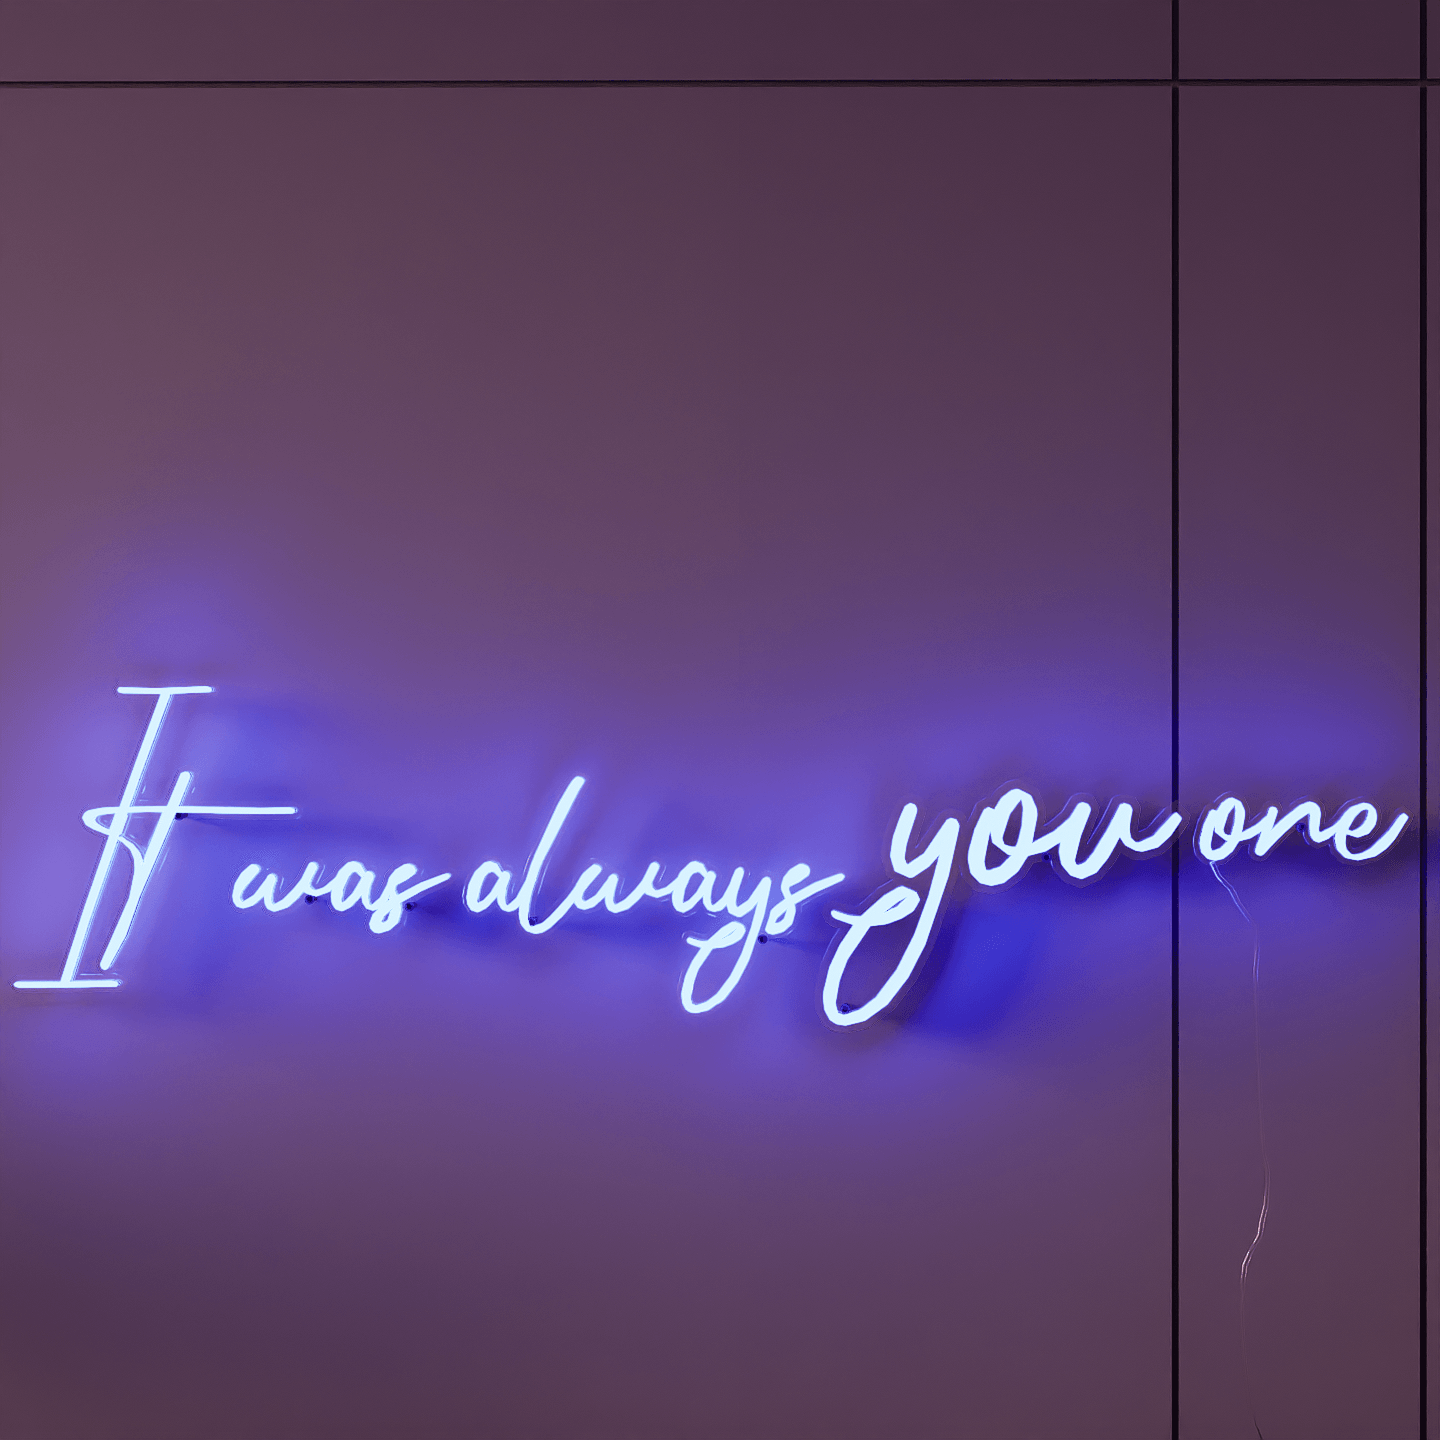 frontal-shot-of-lit-blue-neon-lights-hanging-on-wall-for-display-it-was-always-you-one